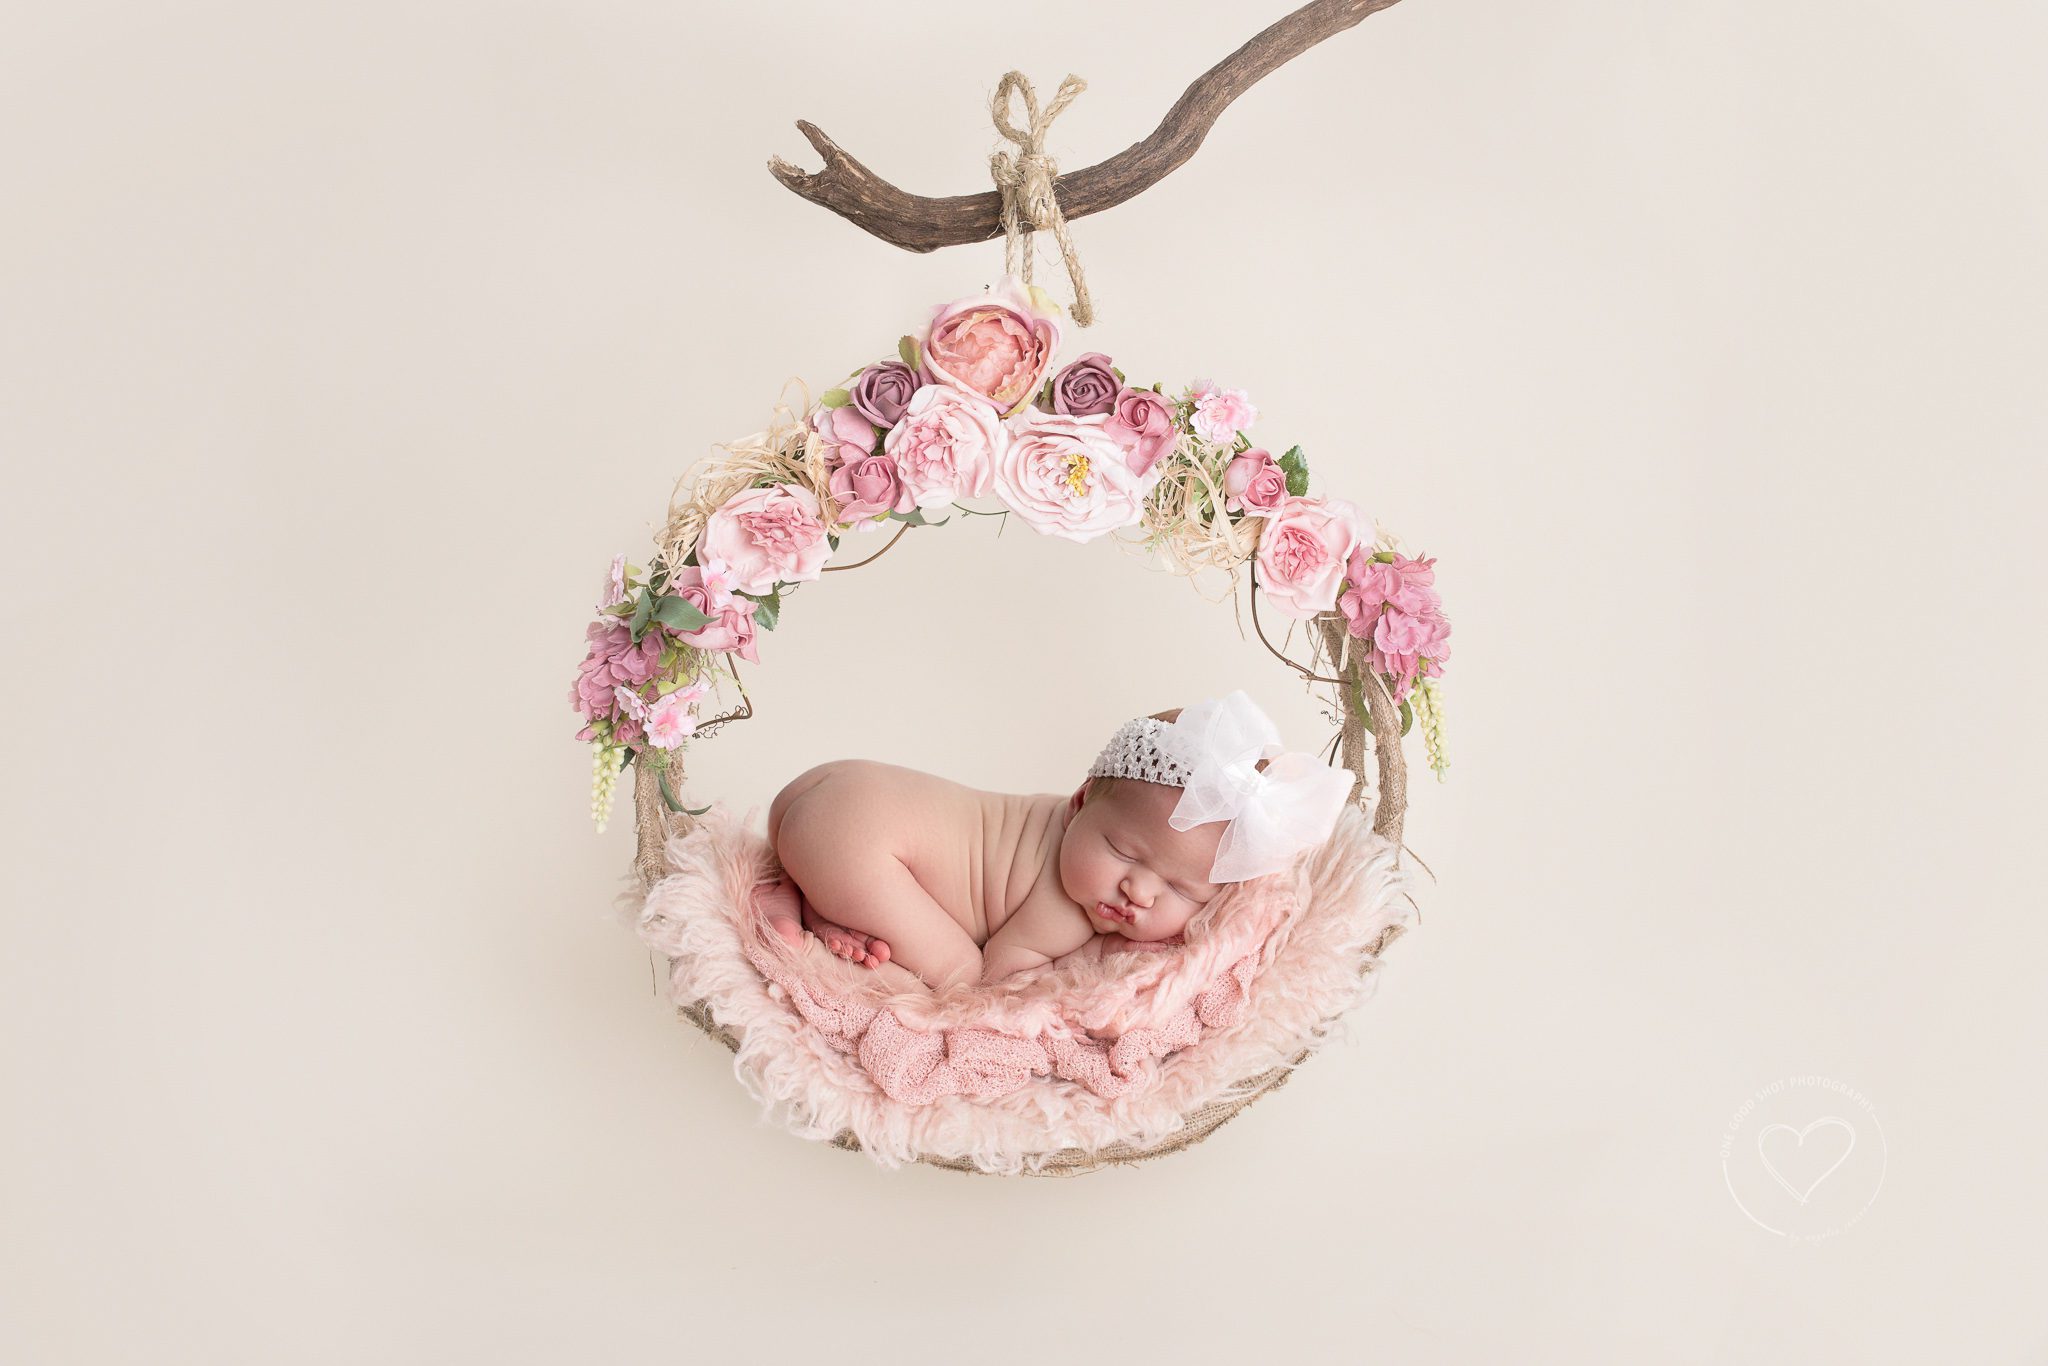 newborn baby girl, hanging in floral swing, tushy up pose, big white bow